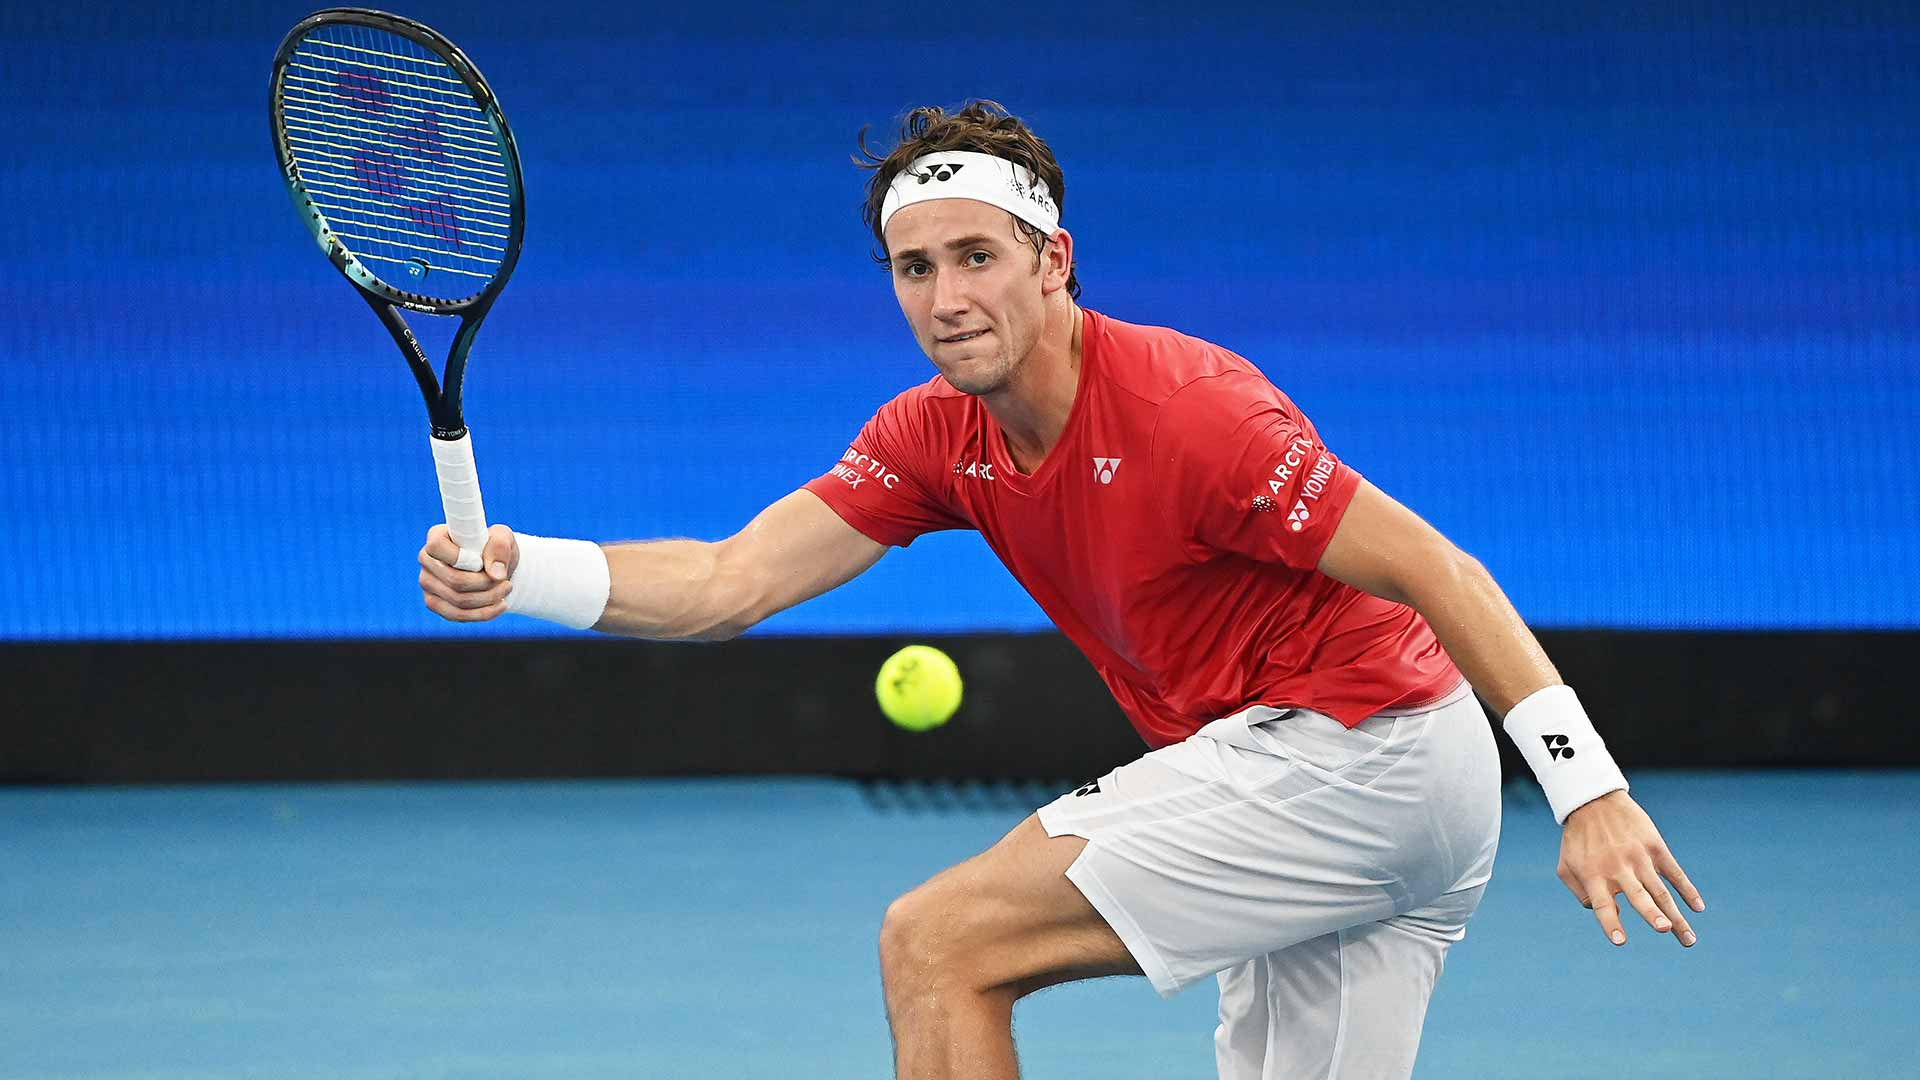 <a href='https://www.atptour.com/en/players/casper-ruud/rh16/overview'>Casper Ruud</a> begins the 2022 ATP Tour season with two wins from his three outings at <a href='https://www.atptour.com/en/tournaments/atp-cup/8888/overview'>ATP Cup</a>.